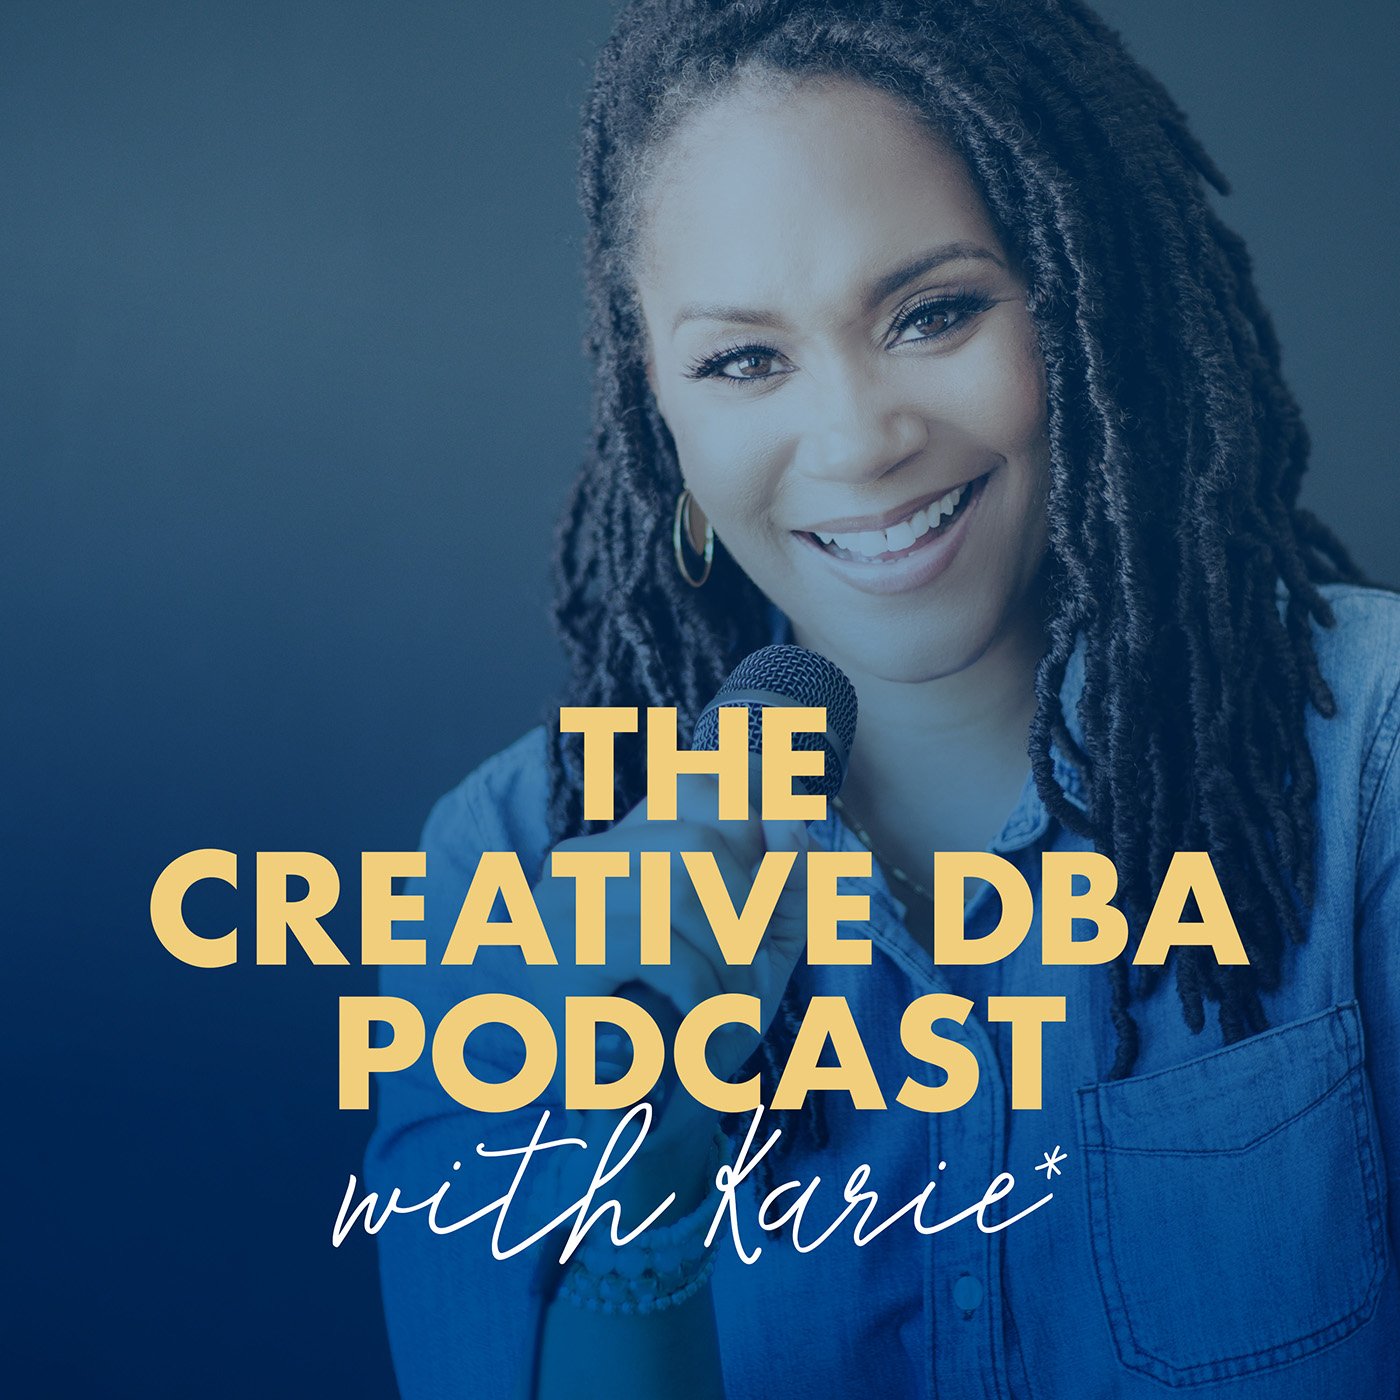 The Creative DBA Podcast with Karie cover art featuring Karie talking into a microphone